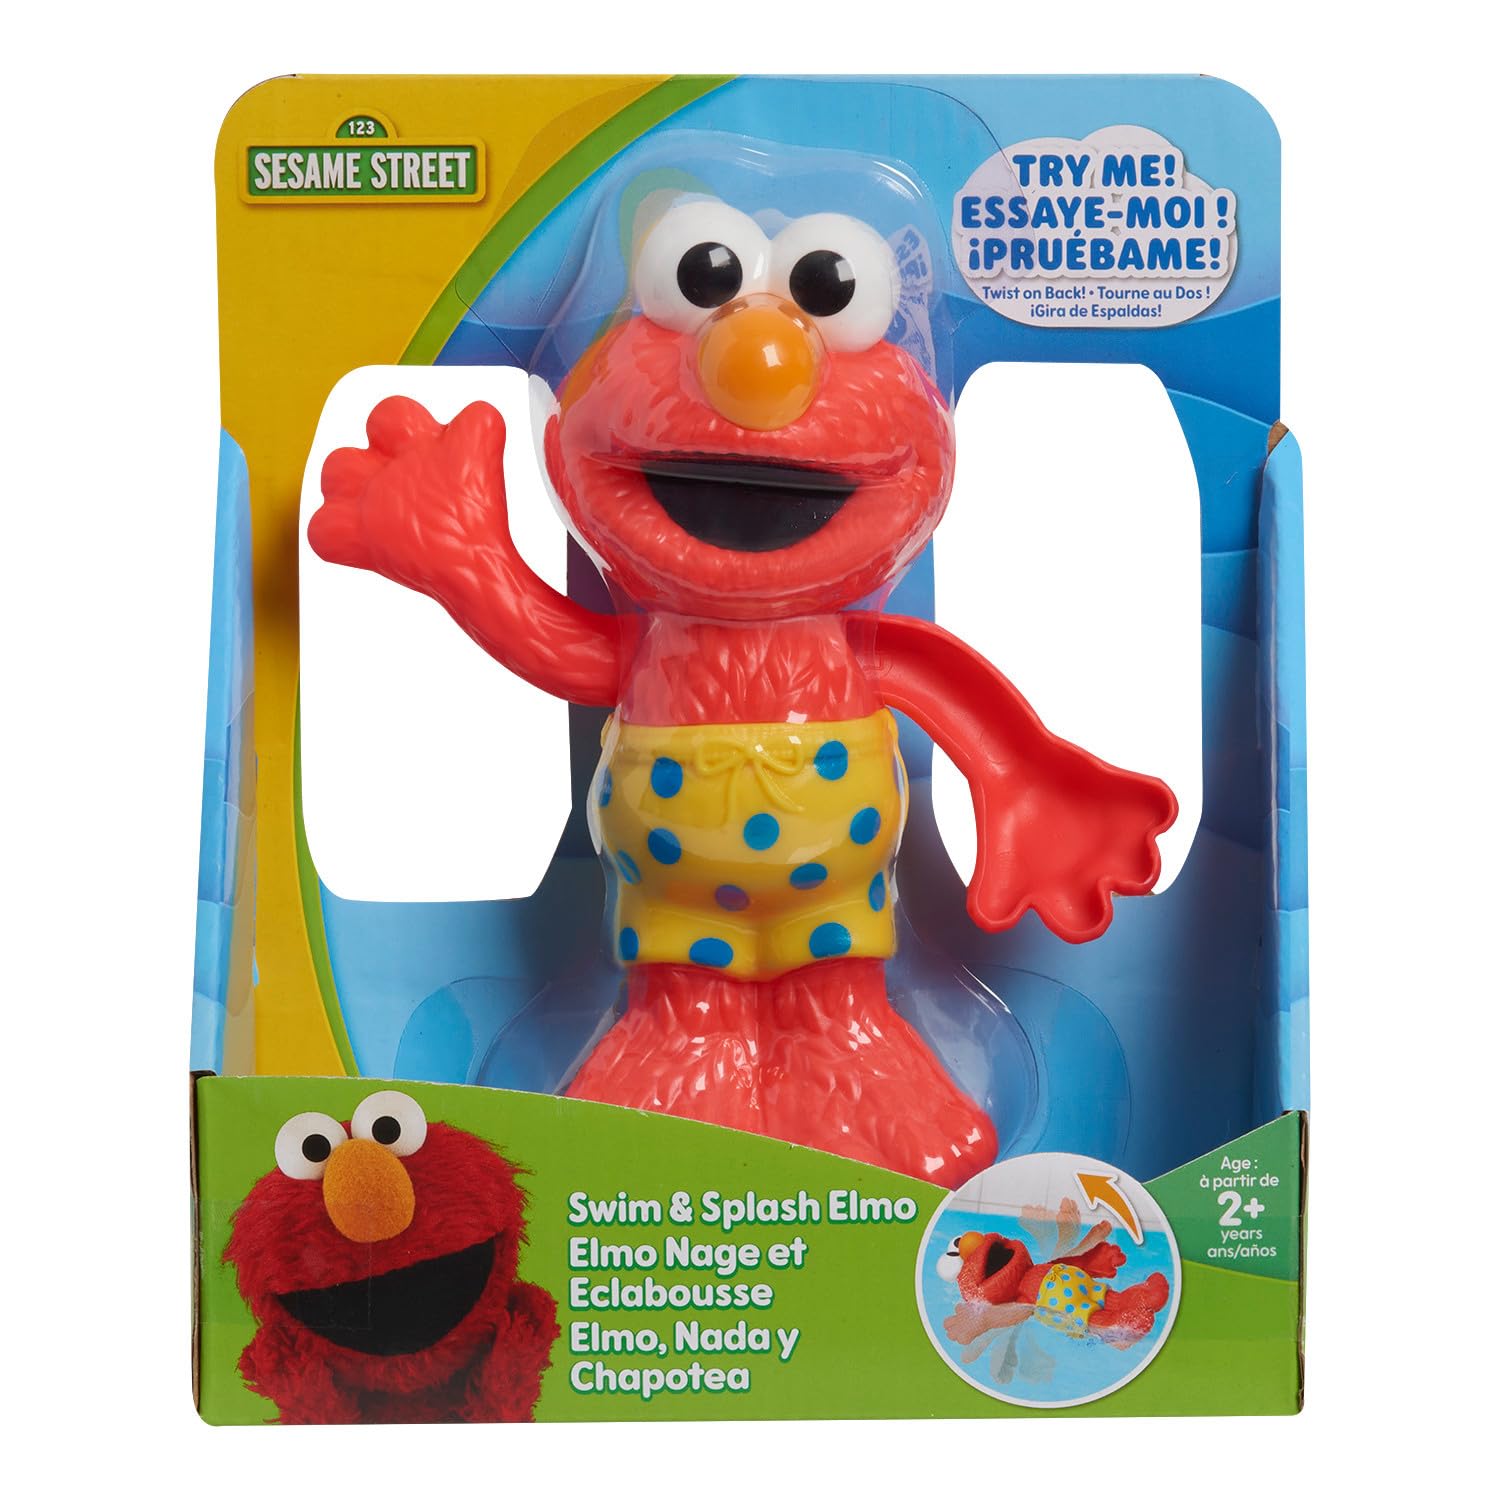 Sesame Street Swim and Splash Elmo Wind Up Bath and Pool Toy, Officially Licensed Kids Toys for Ages 2 Up by Just Play